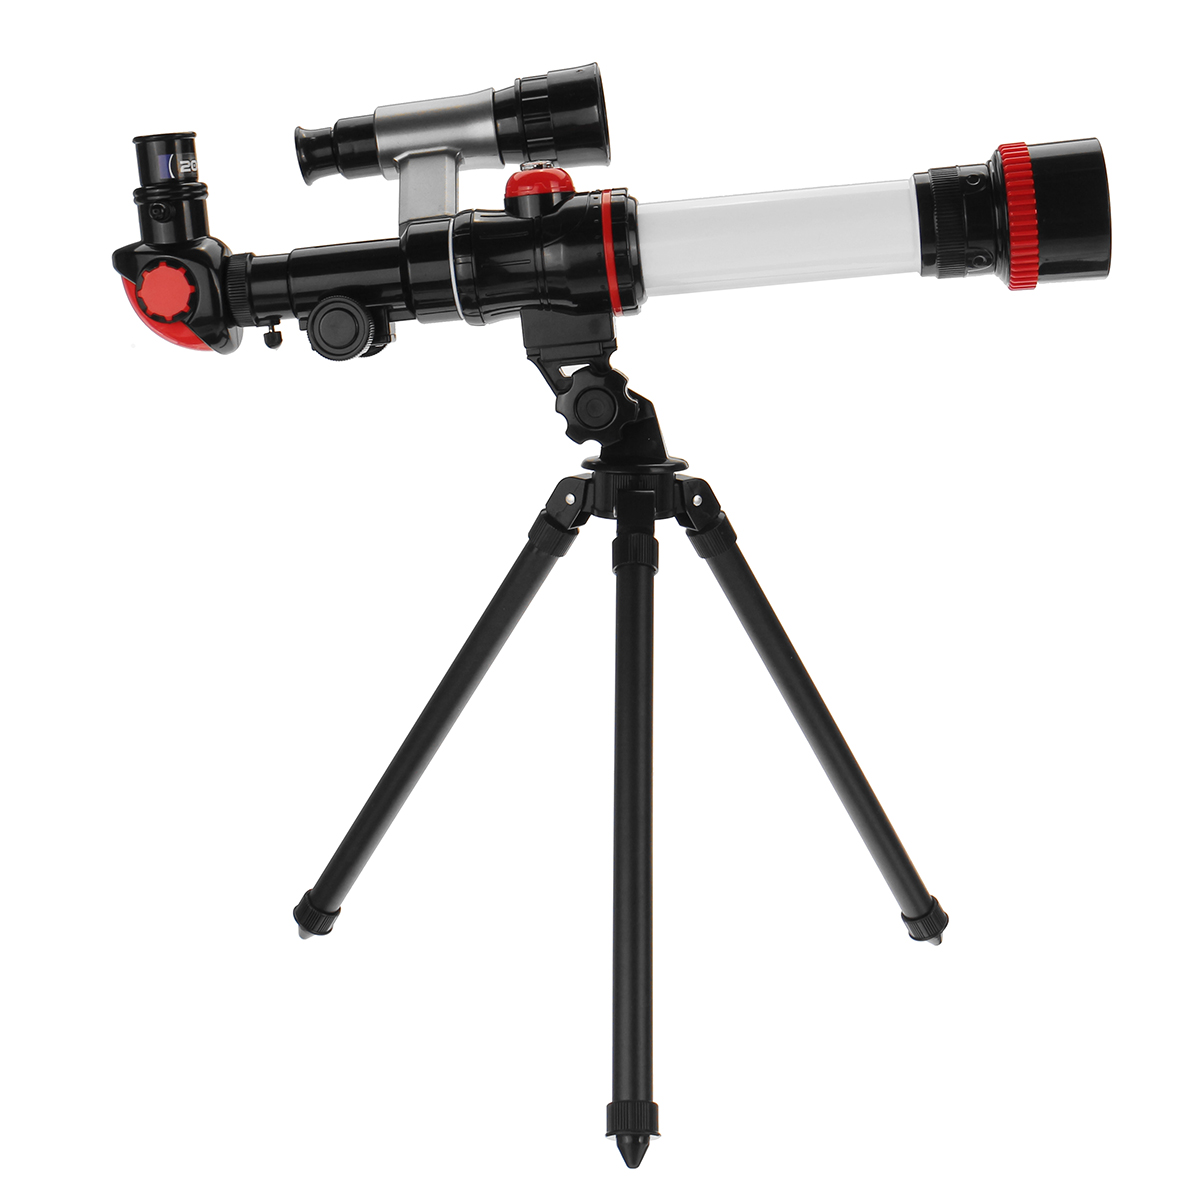 30-40X-Astronomical-Telescope-HD-Refraction-Optical-Monoculars-for-Adult-Kids-Beginners-with-Tripod-1836751-9